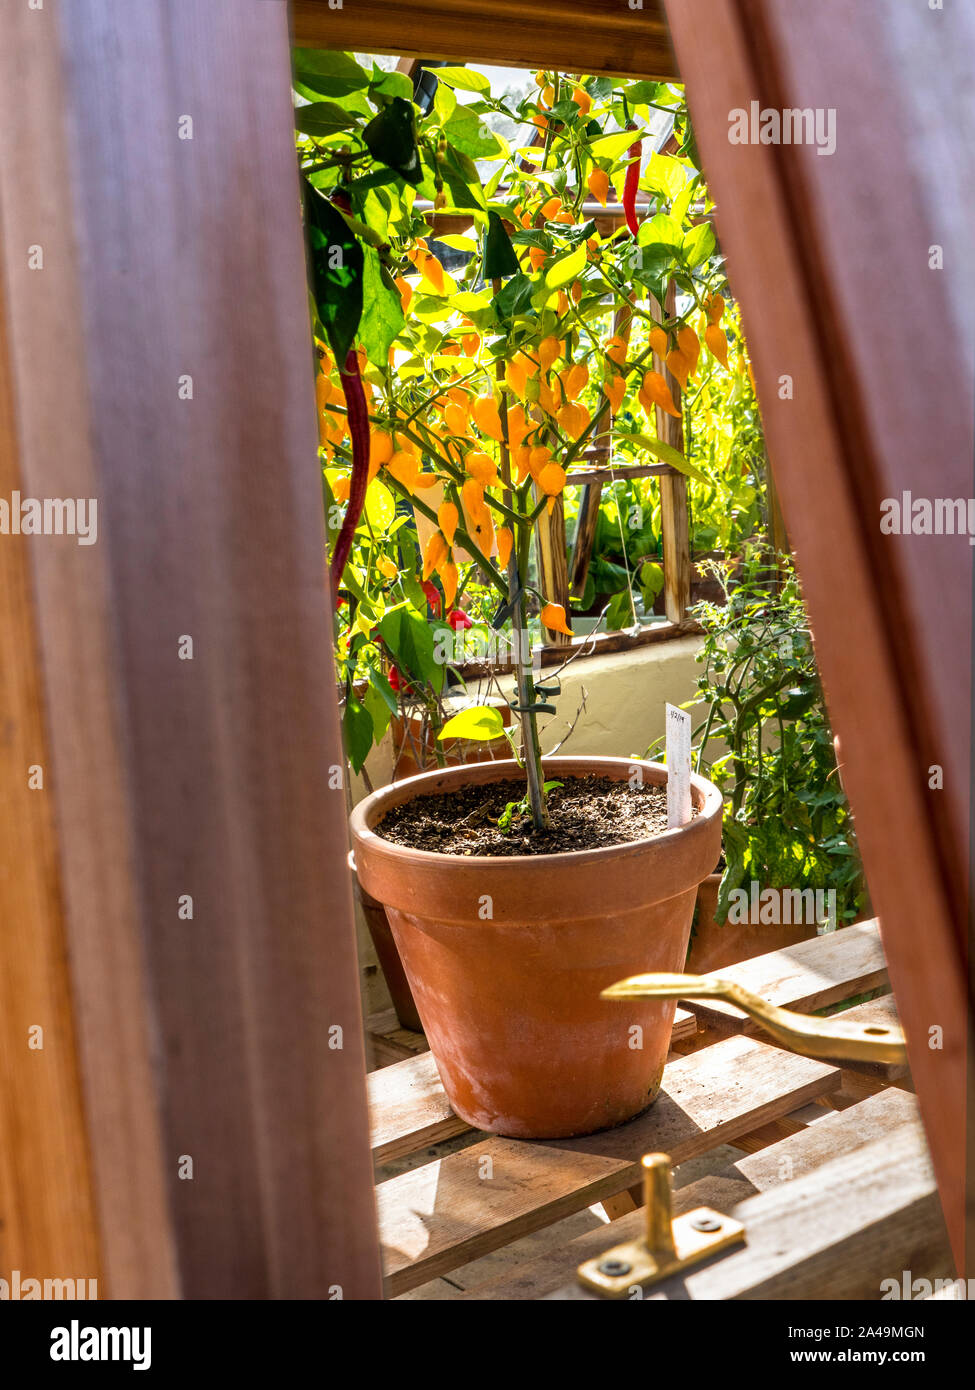 Orange potted chillies capsicum annum viewed through sunny open traditional wooden greenhouse window Stock Photo